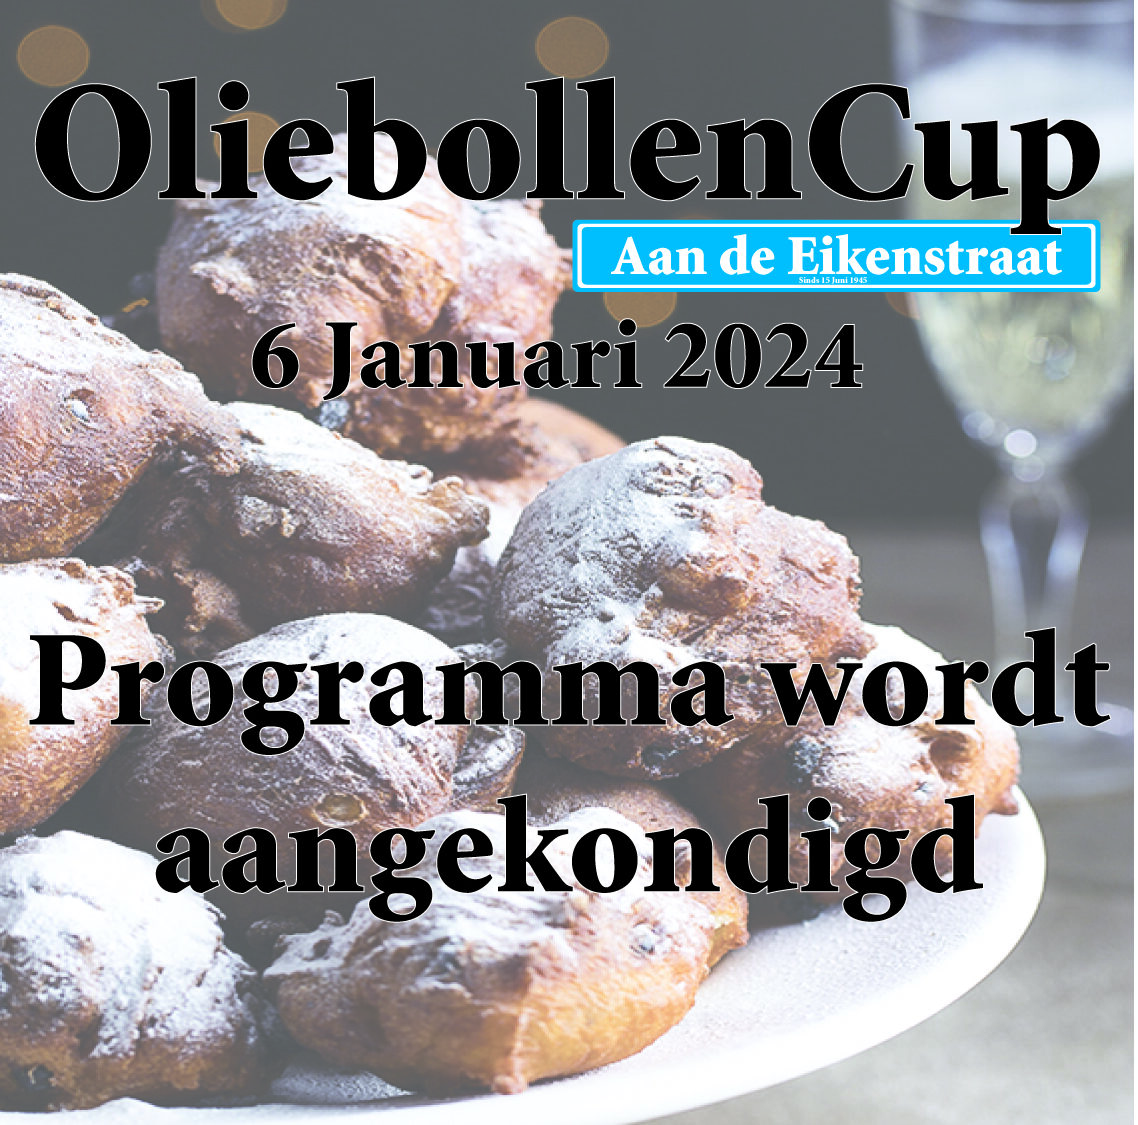 Featured image for “OLIEBOLLENCUP 2024”